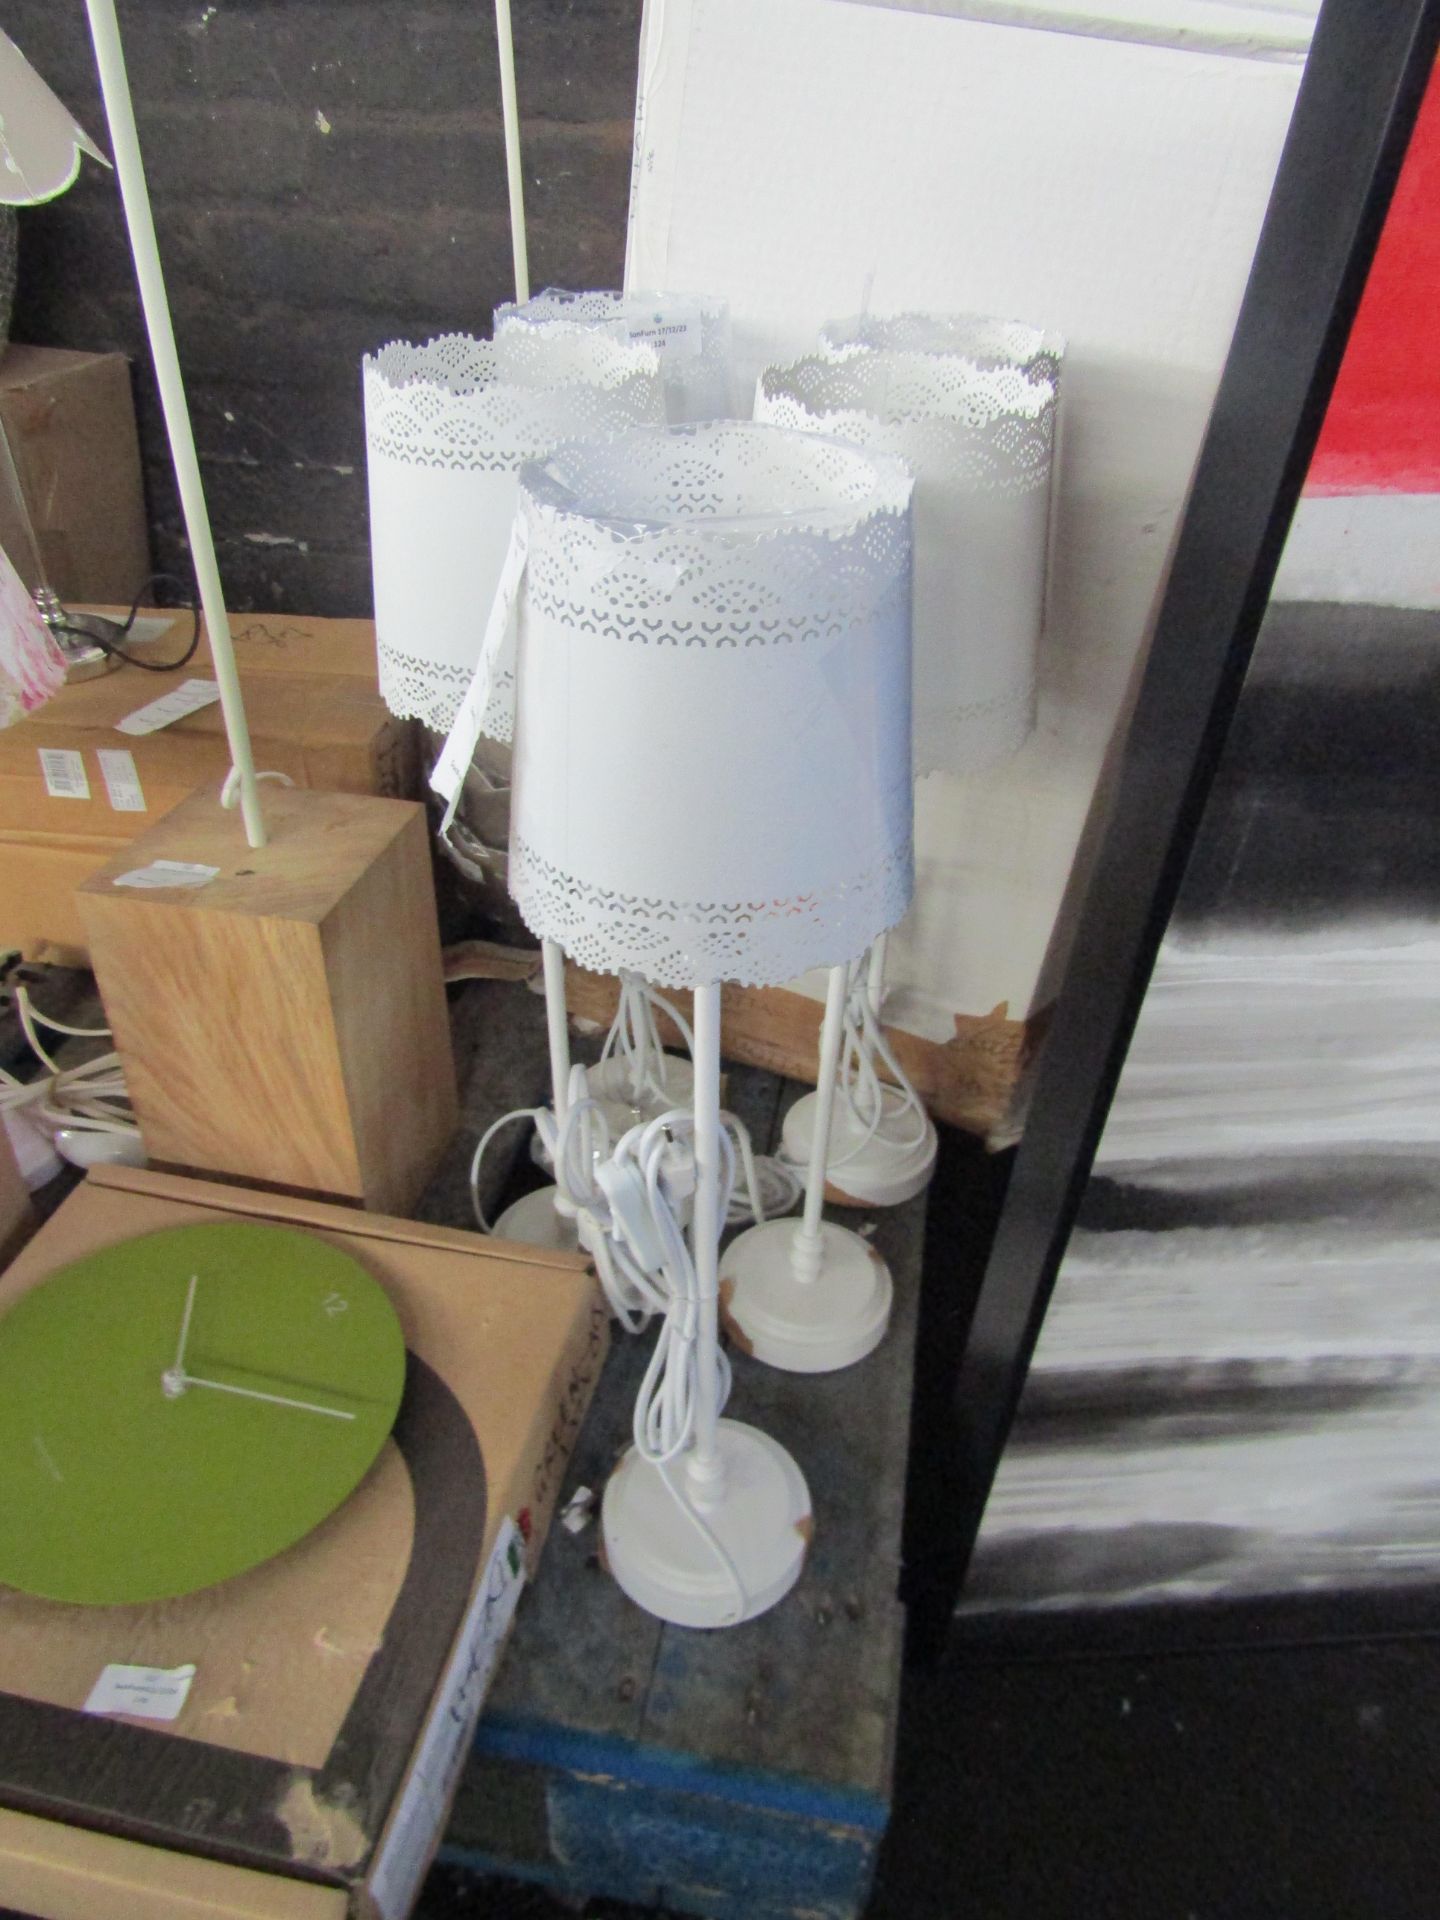 Contemporary Laced Look Table Lamp White. Size: Lamp H40cm - Shade 25 x 25 x 20cm - RRP ?75.00 - New